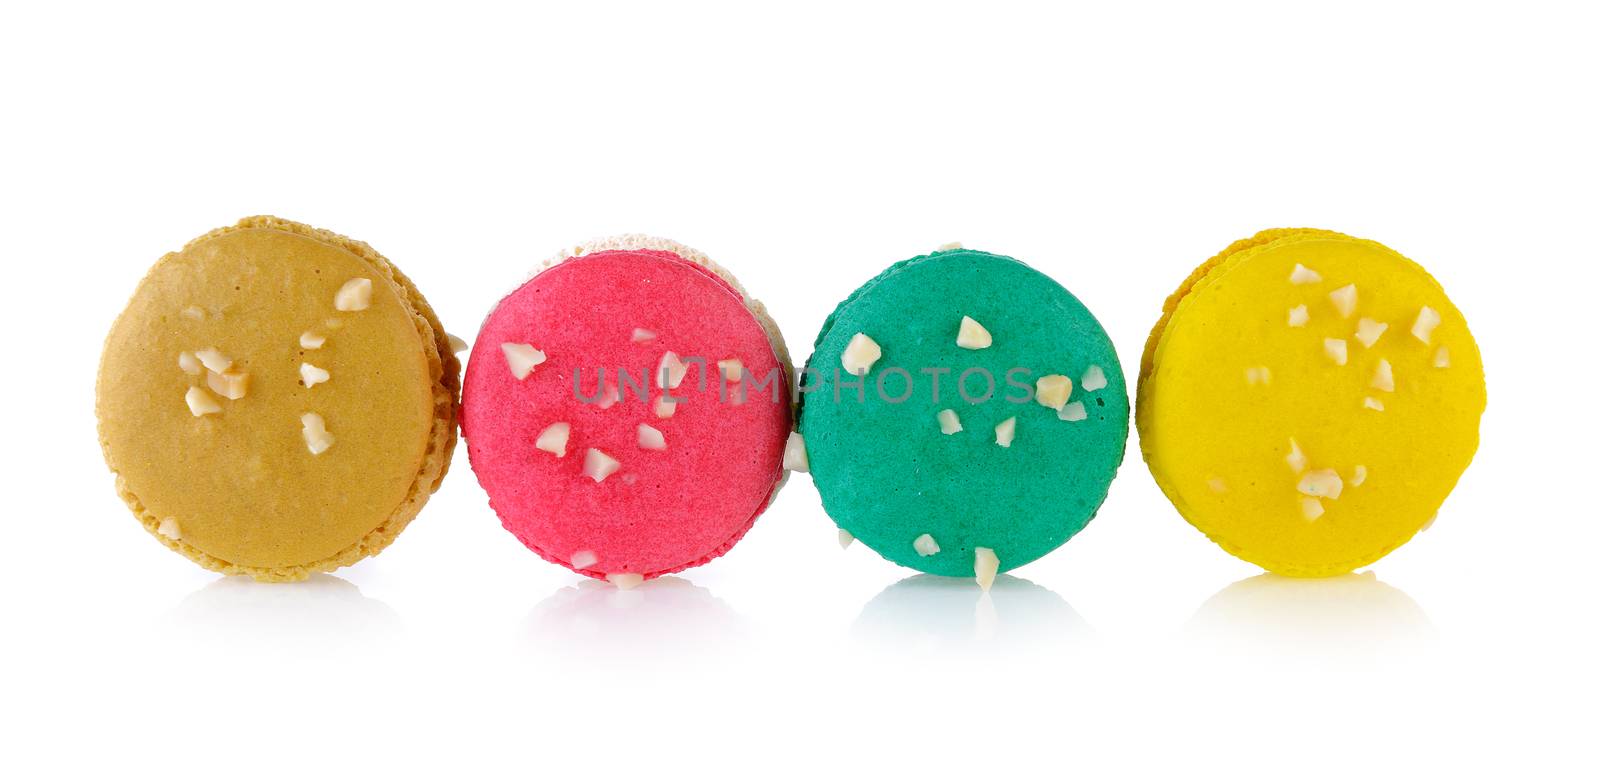  beautiful macaroons on white background by sommai